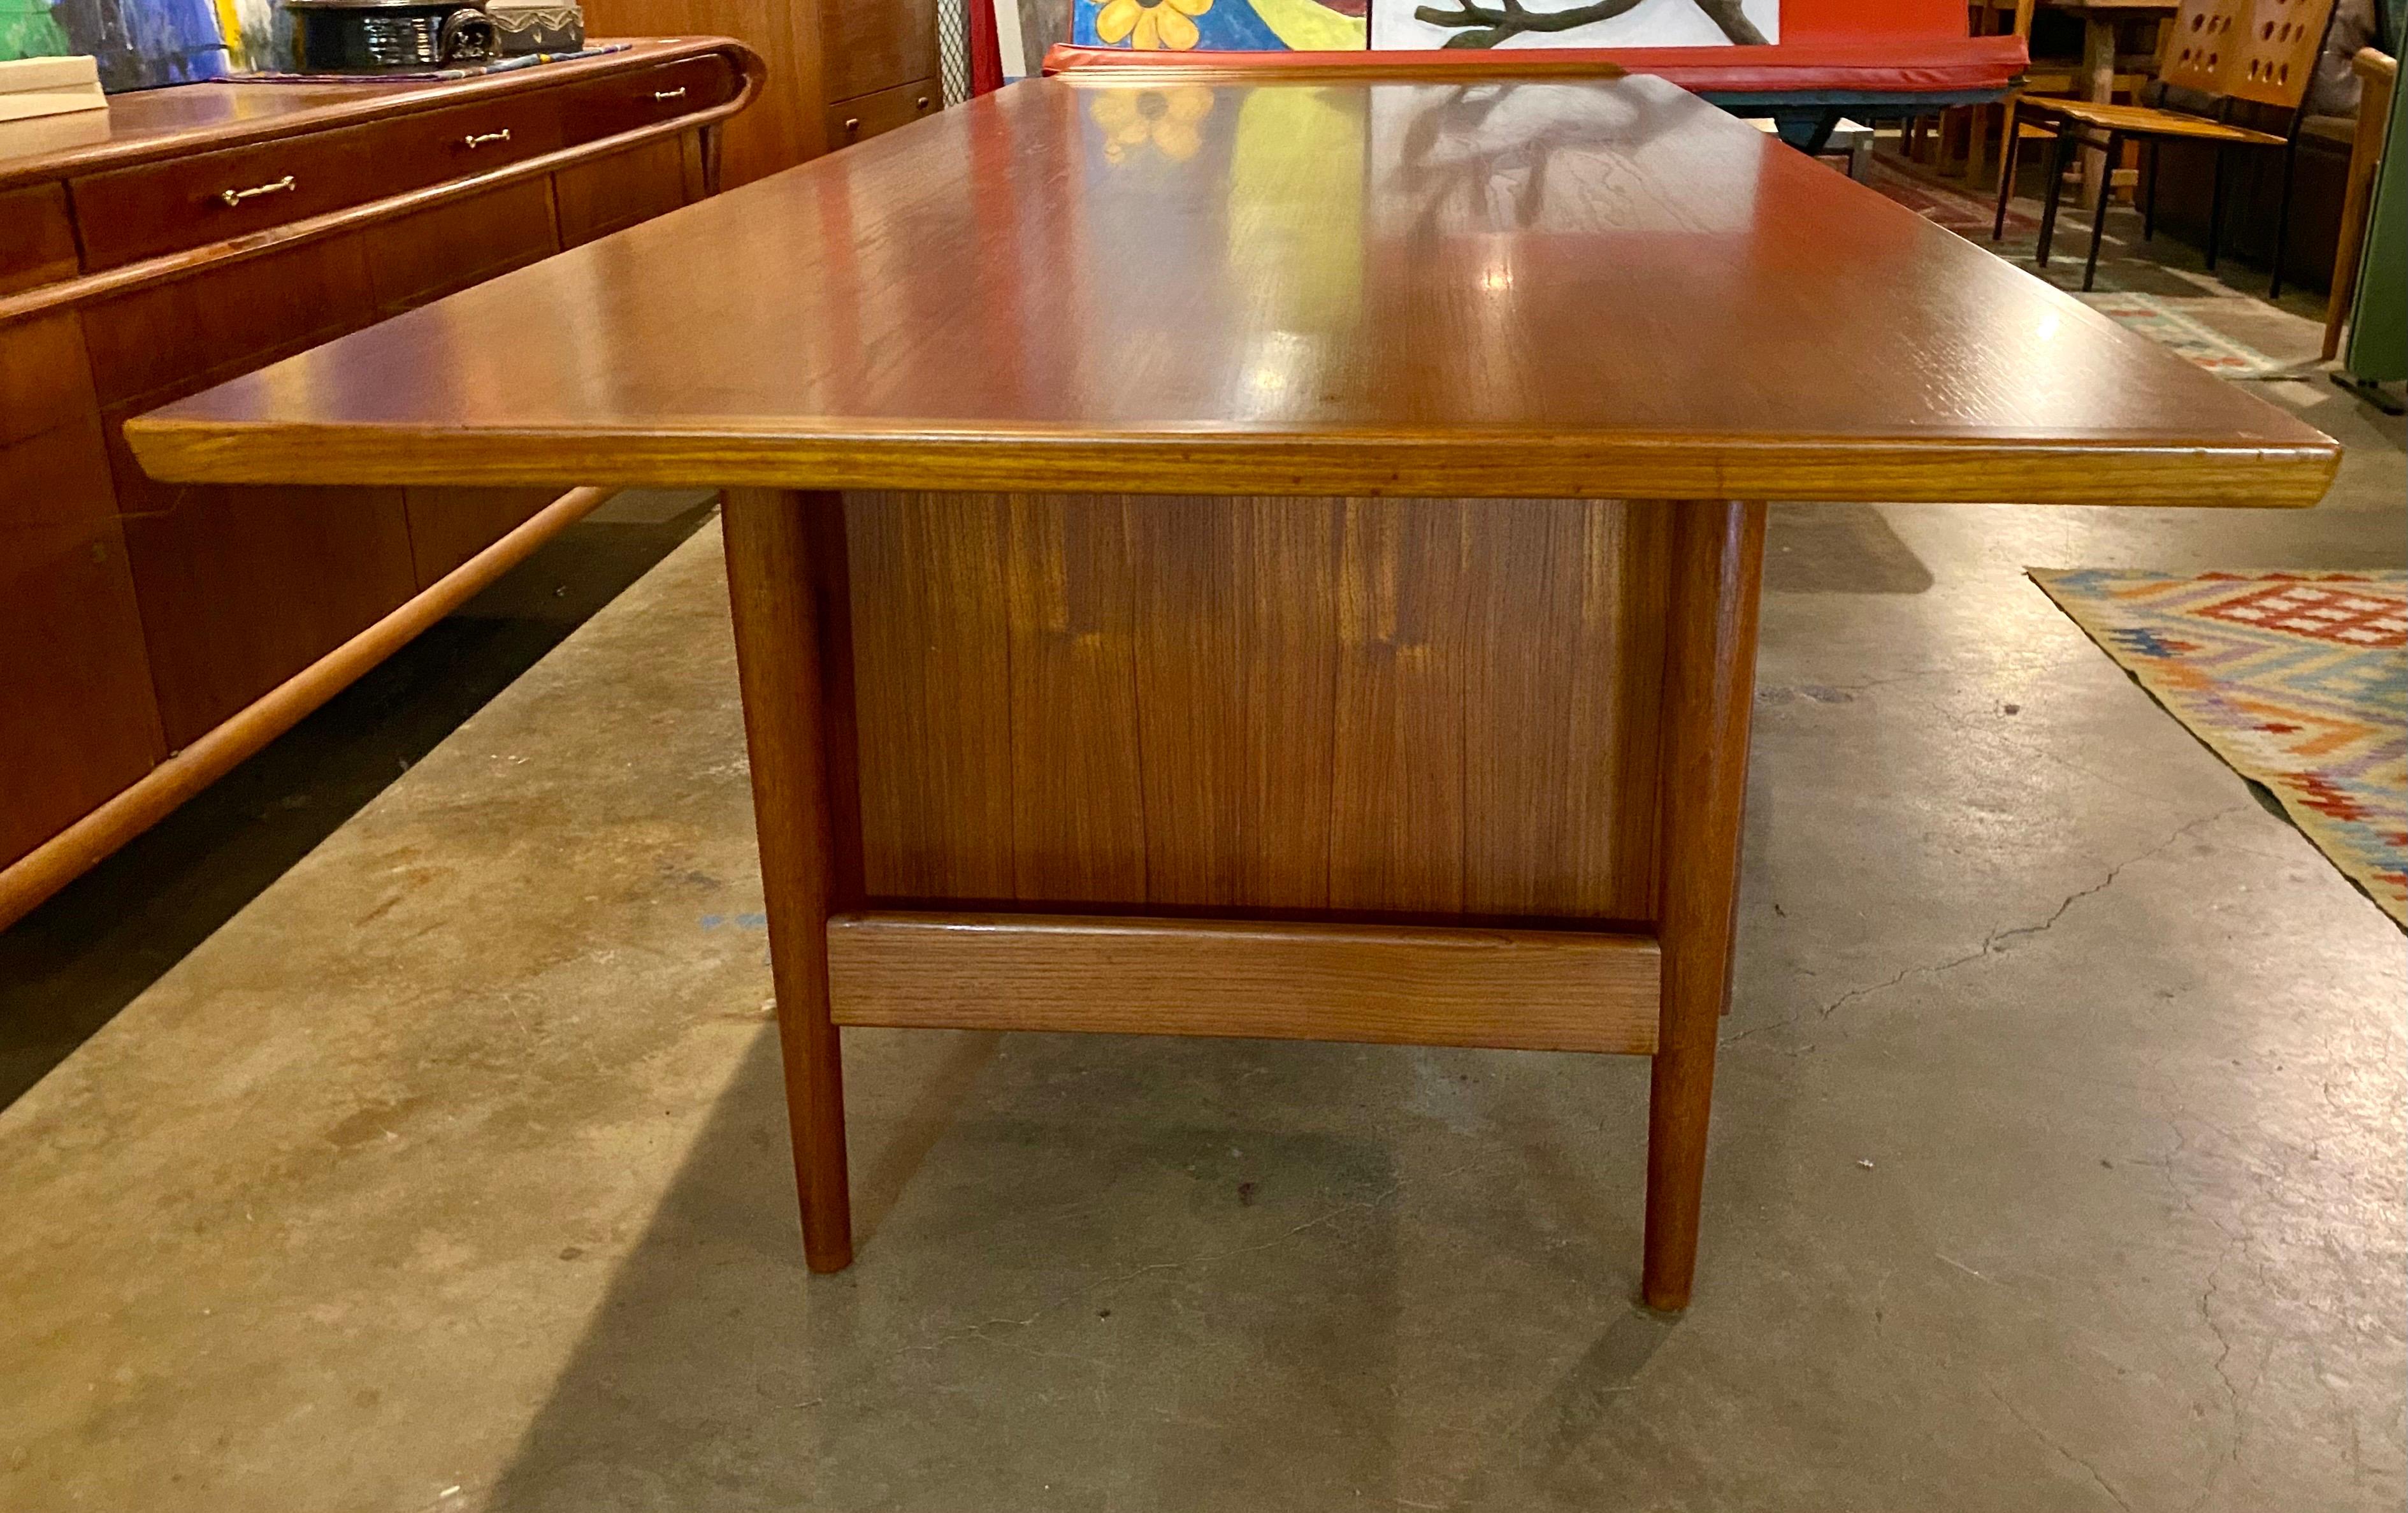 Large Danish modern 'Model 207' executive teak desk designed by Arne Vodder. This Danish mid-century modern features 3 drawers on the left and one drawer and a larger compartment on the right with teak pulls and has raised edges on both sides of the